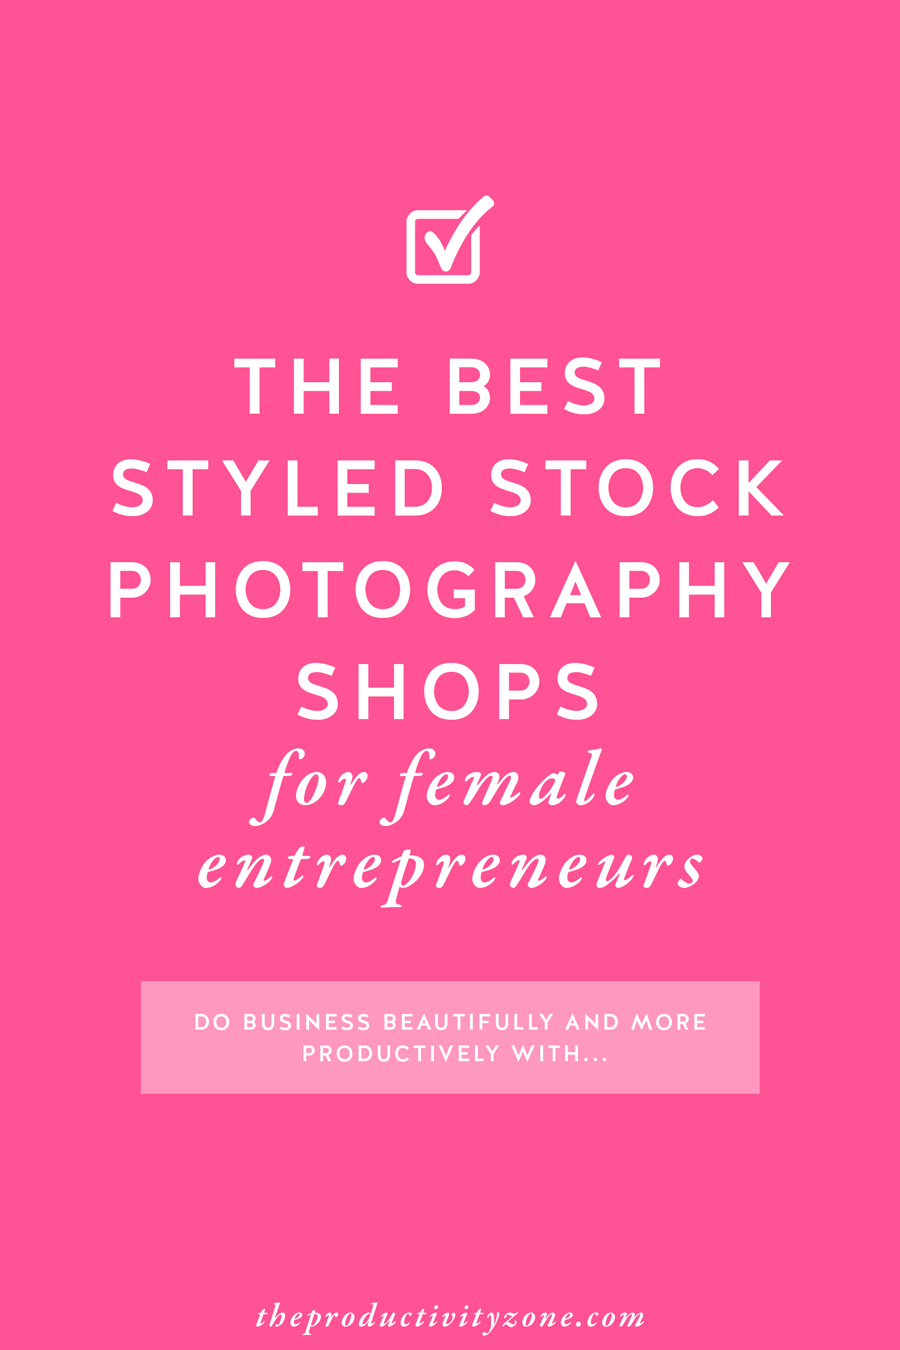 The best styled stock photography shops for female entrepreneurs!! Need I say more?! Find out the only two shops I personally recommend for creative small business owners and bloggers on The Productivity Zone!!